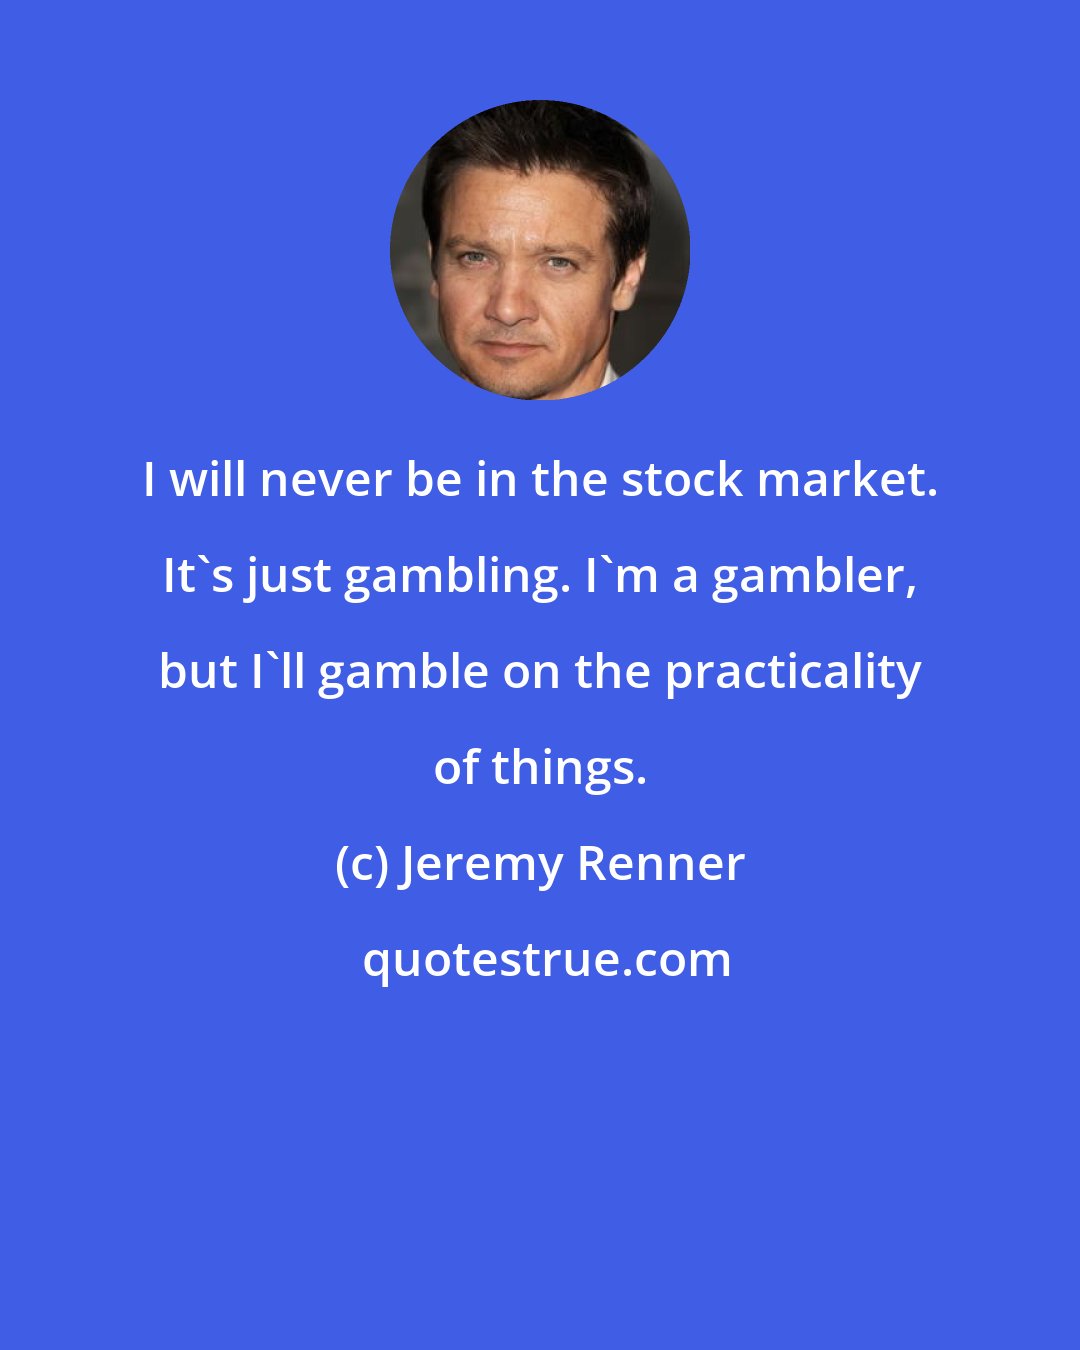 Jeremy Renner: I will never be in the stock market. It's just gambling. I'm a gambler, but I'll gamble on the practicality of things.